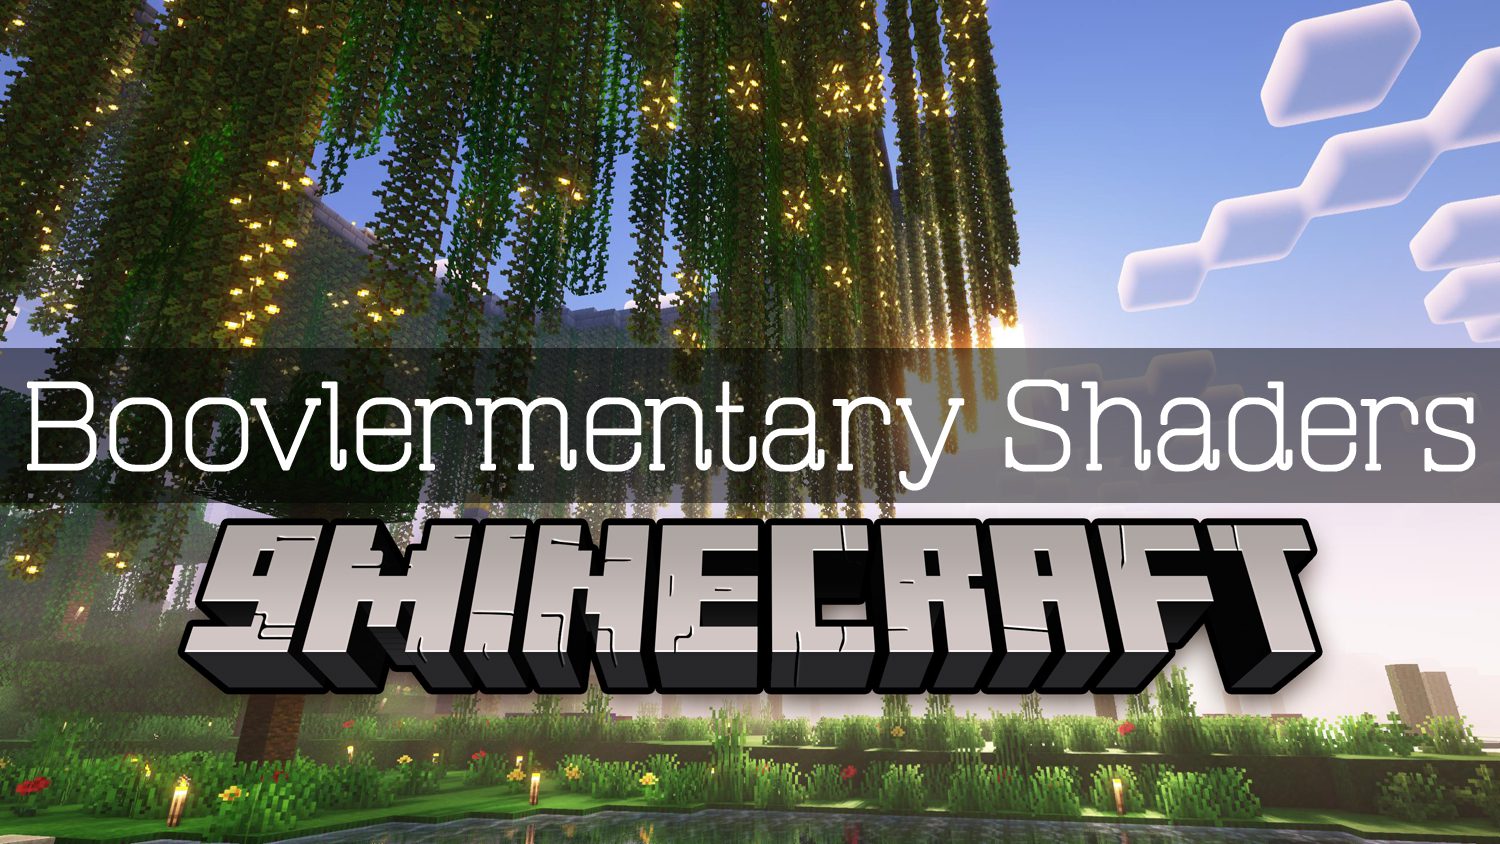 Boovlermentary Shaders (1.20.4, 1.19.4) - A Complementary Reimagined Edit 1